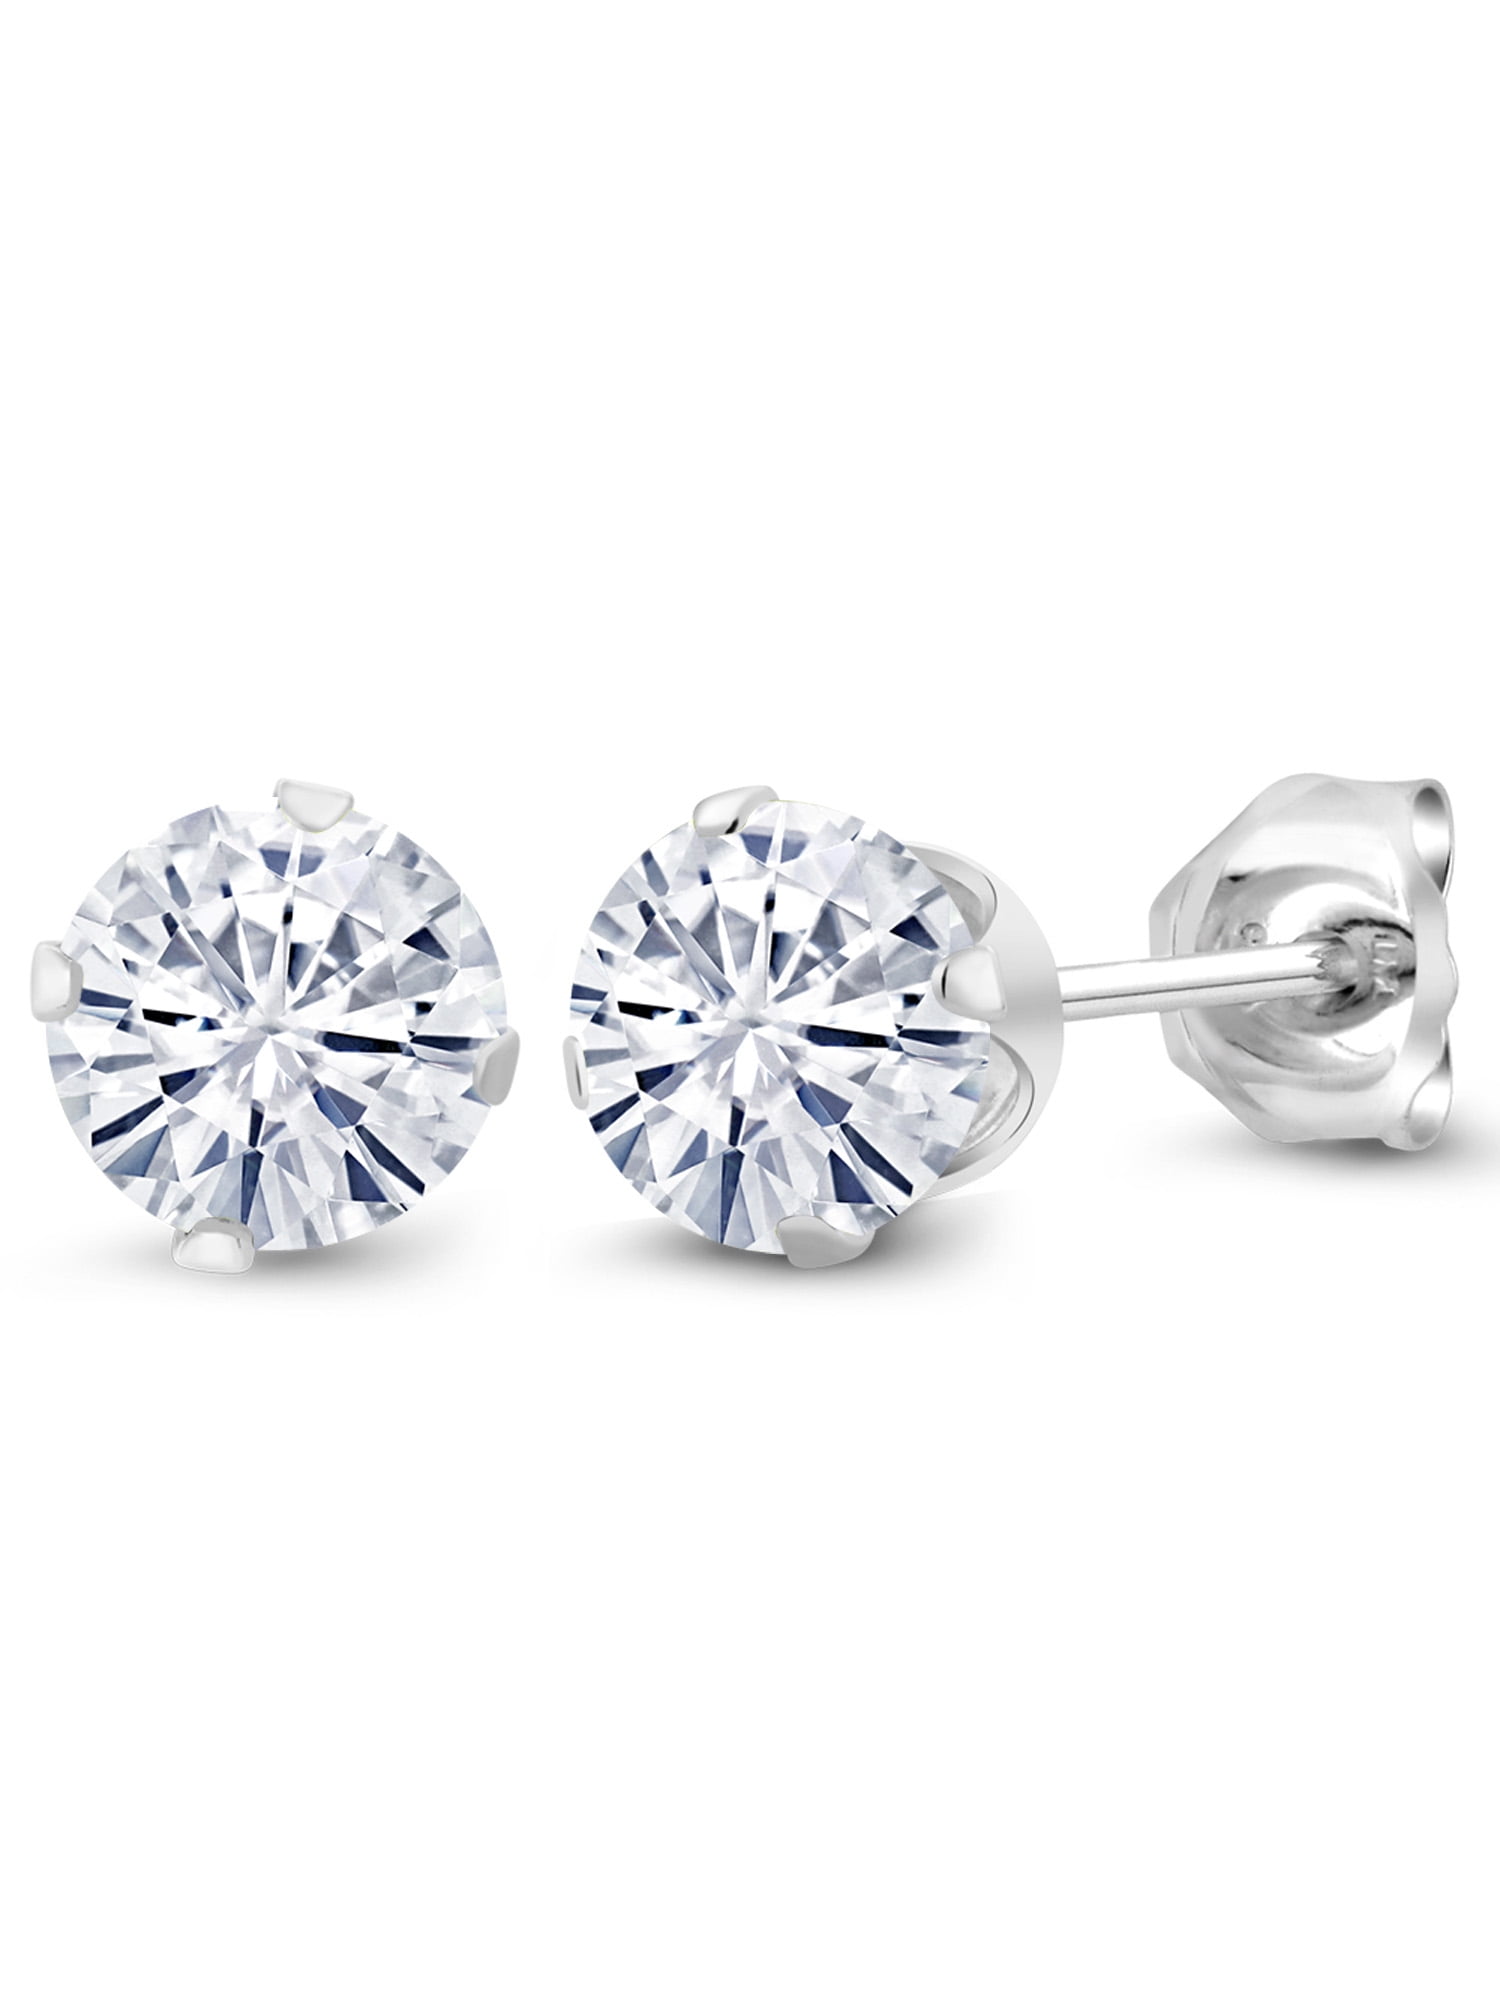 1.80 CT Off White Real Moissanite Solitaire Stud Earrings 925 Sterling Silver